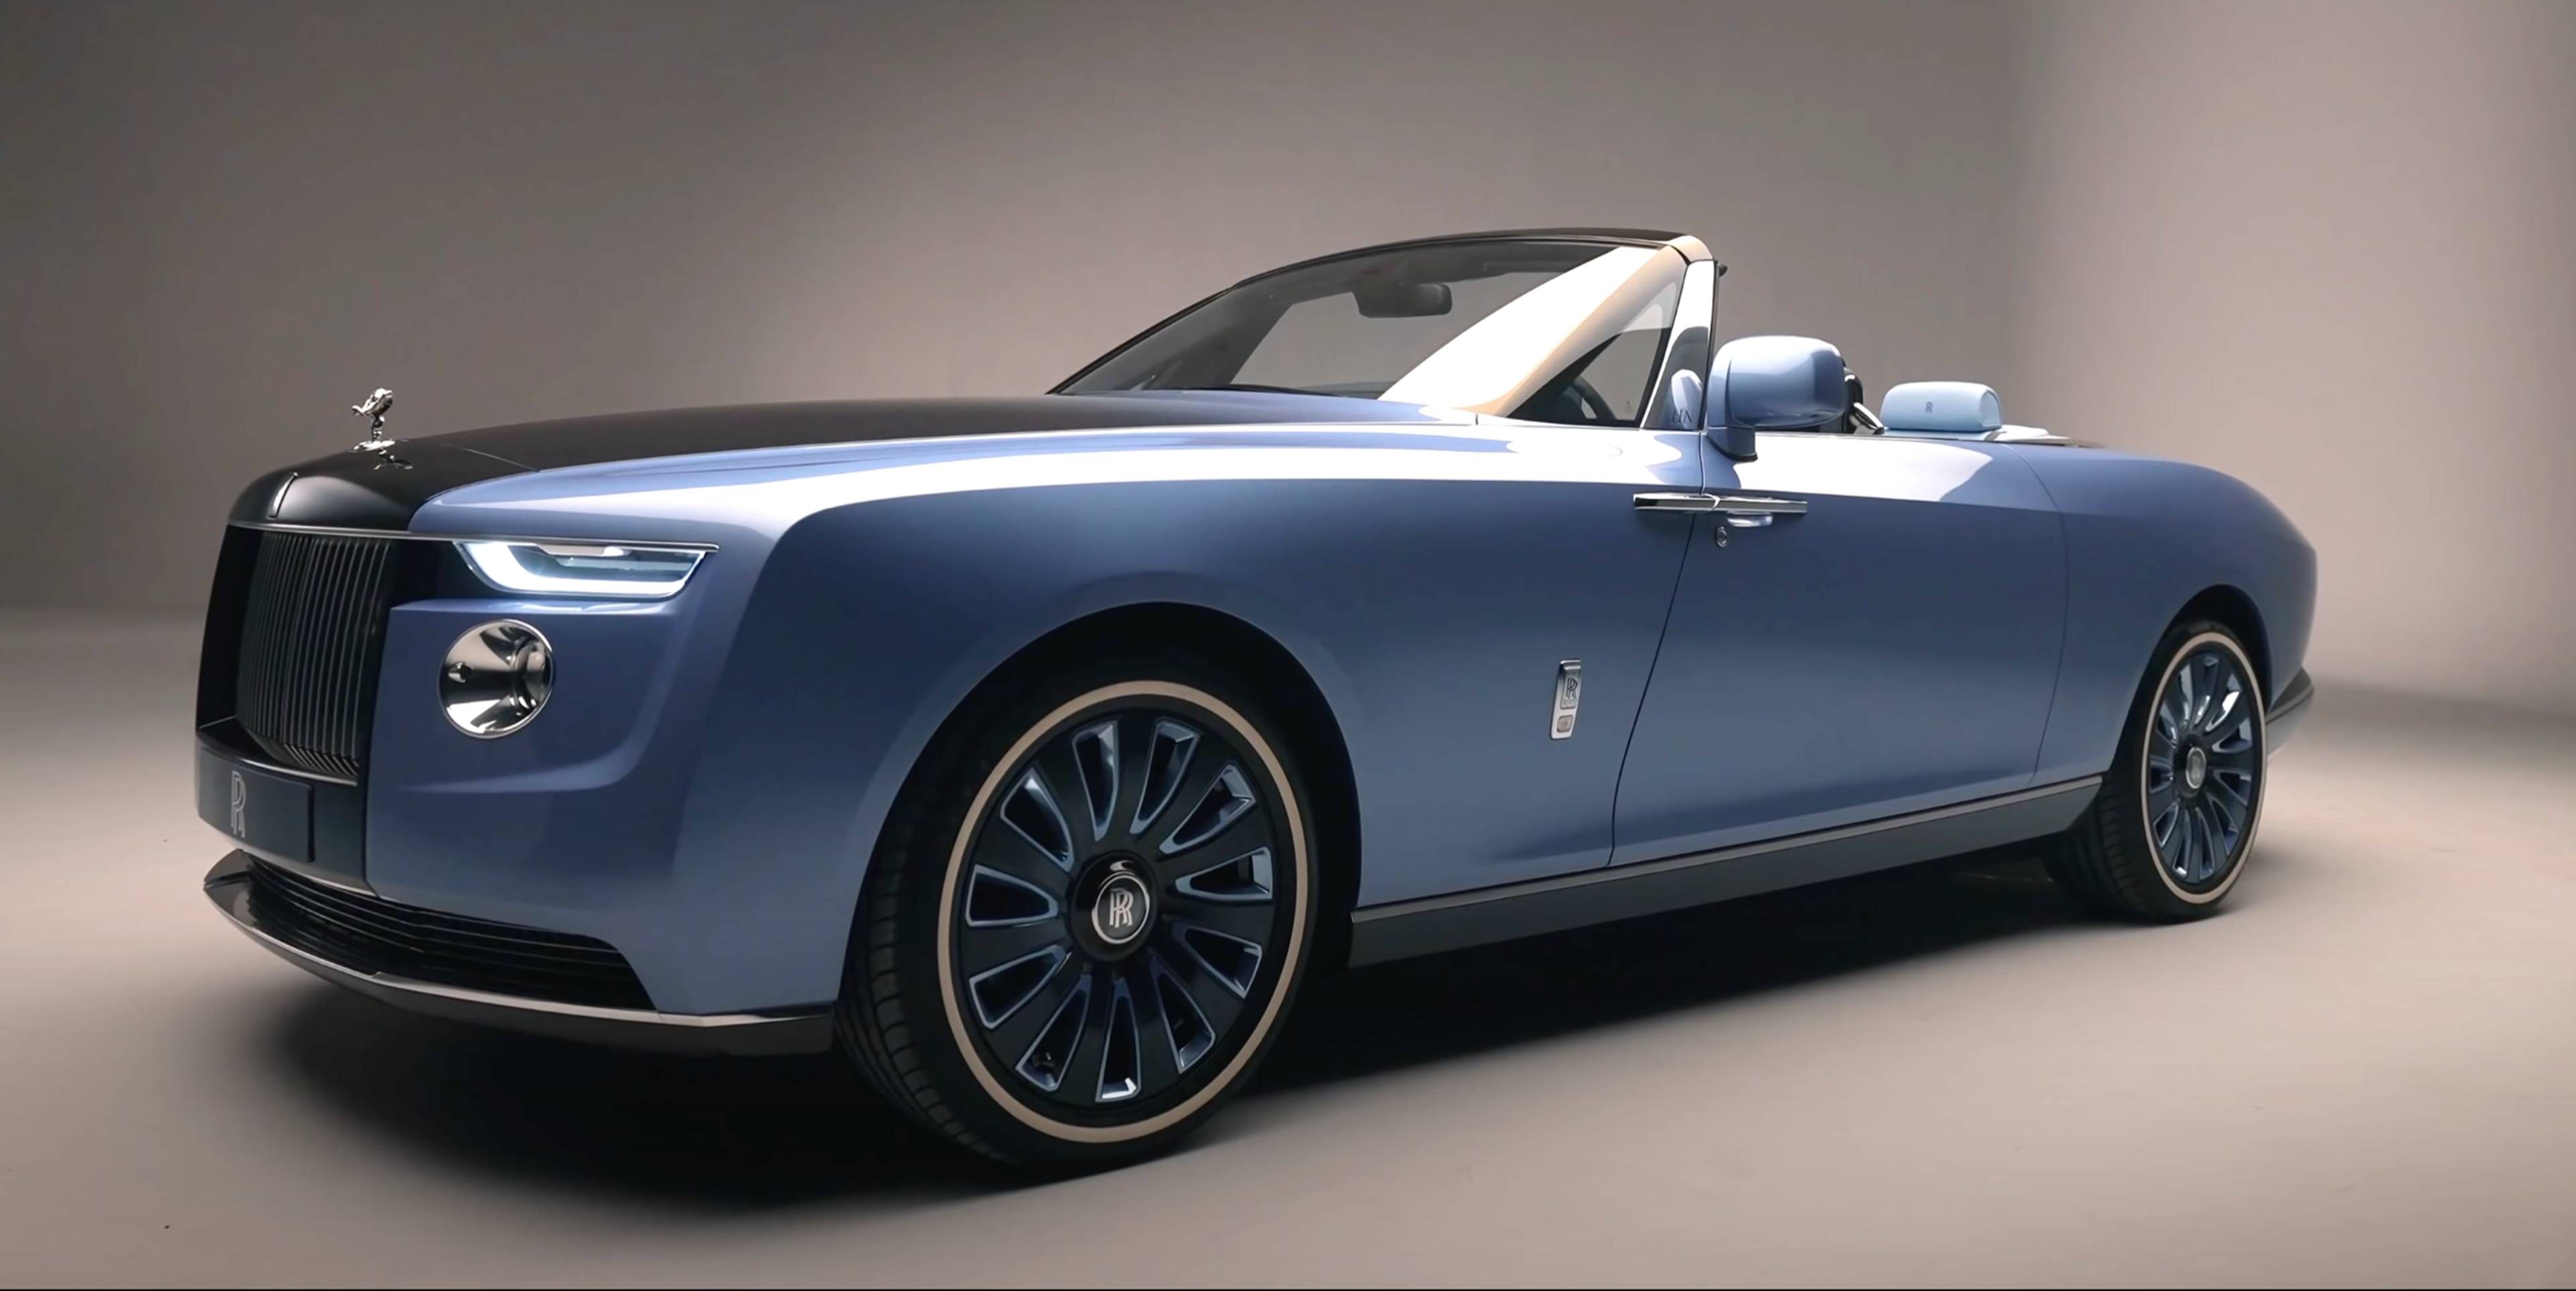 Meet the Rolls-Royce Boat-Tail, the most expensive and luxurious